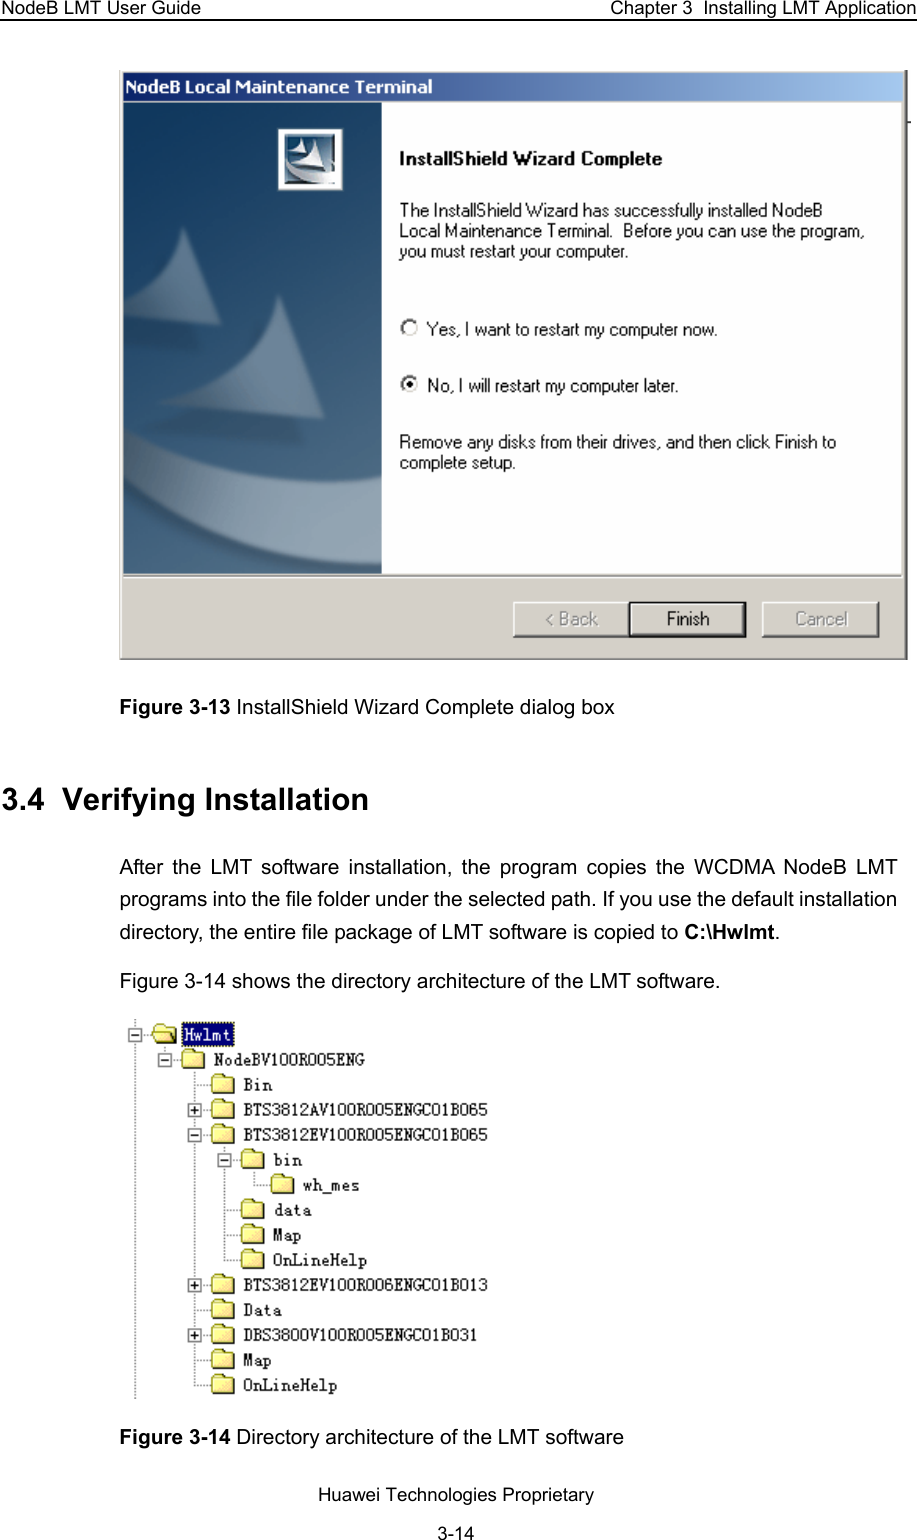 NodeB LMT User Guide  Chapter 3  Installing LMT Application  Figure 3-13 InstallShield Wizard Complete dialog box 3.4  Verifying Installation  After the LMT software installation, the program copies the WCDMA NodeB LMT programs into the file folder under the selected path. If you use the default installation directory, the entire file package of LMT software is copied to C:\Hwlmt.  Figure 3-14 shows the directory architecture of the LMT software.   Figure 3-14 Directory architecture of the LMT software Huawei Technologies Proprietary 3-14 